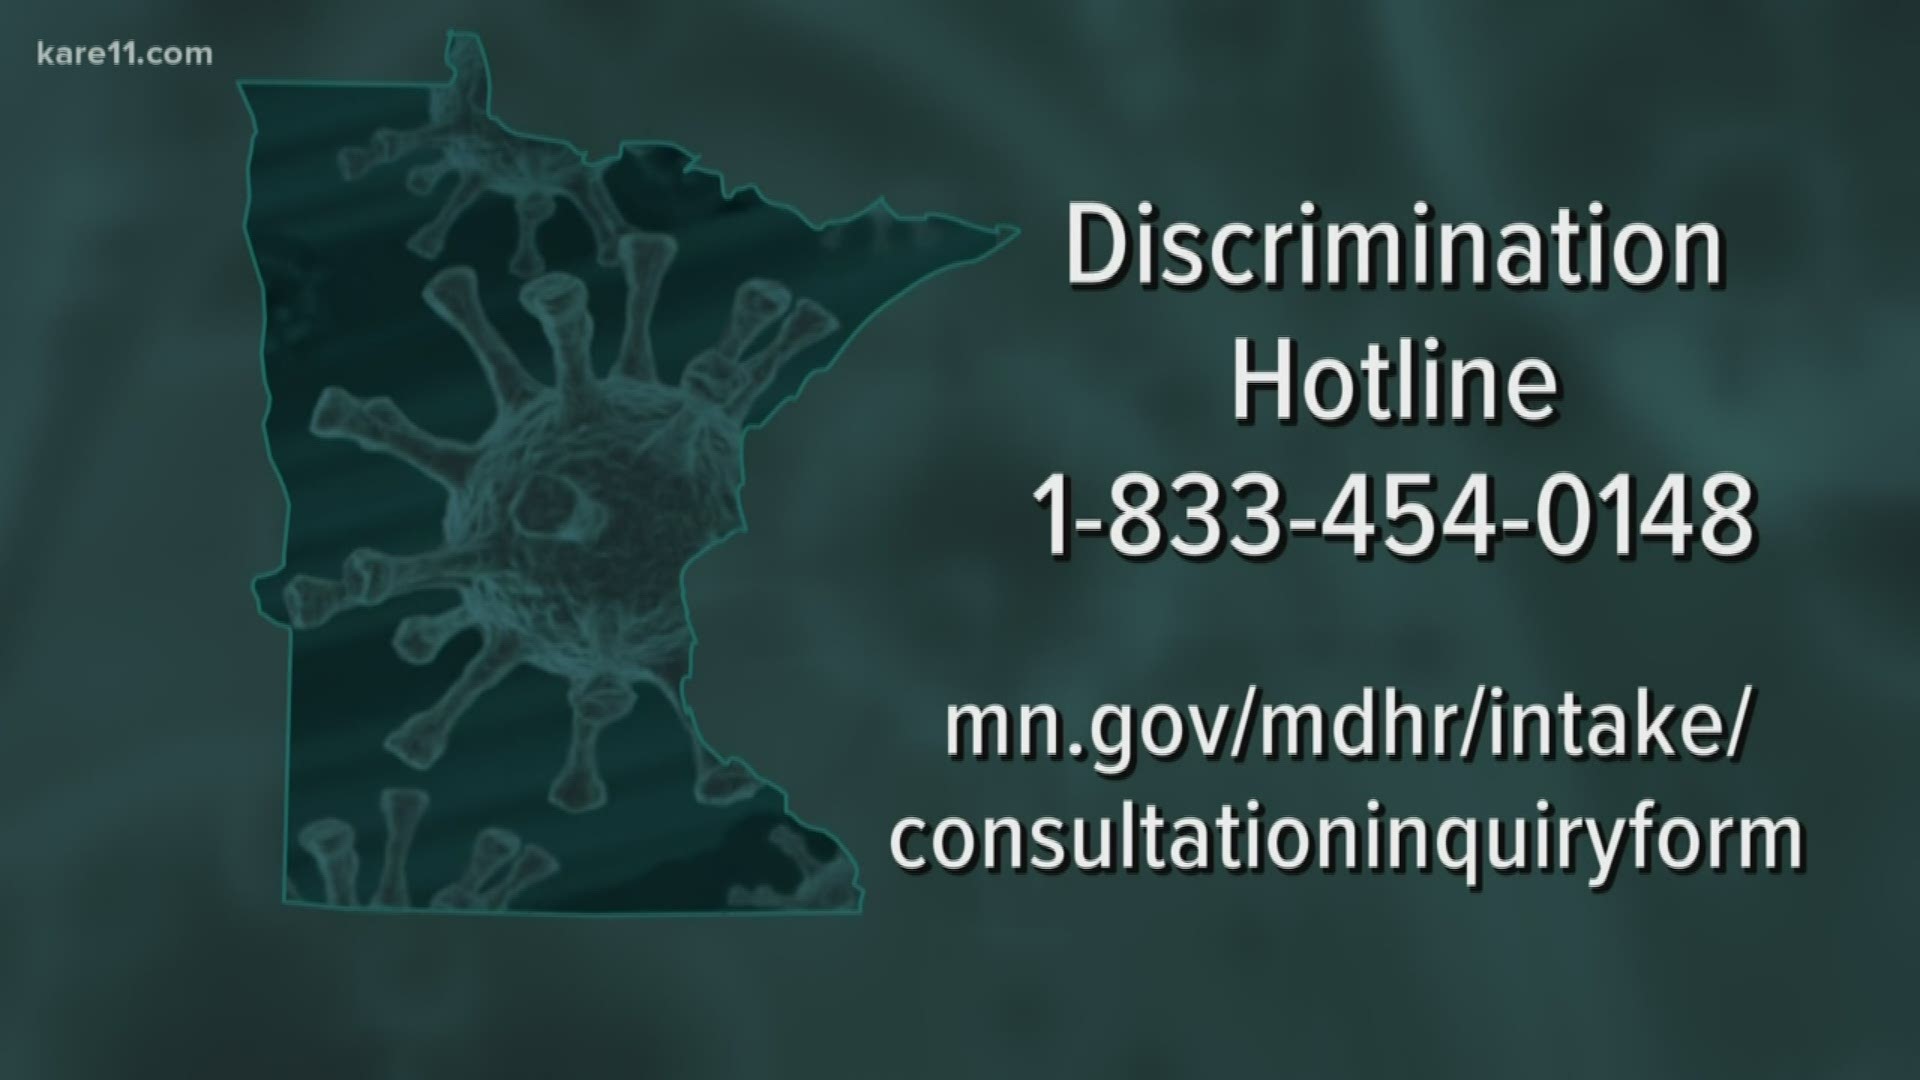 The Walz Administration opened a new help line for people to call if they're harassed or witness harassment, which has increased since the coronavirus pandemic